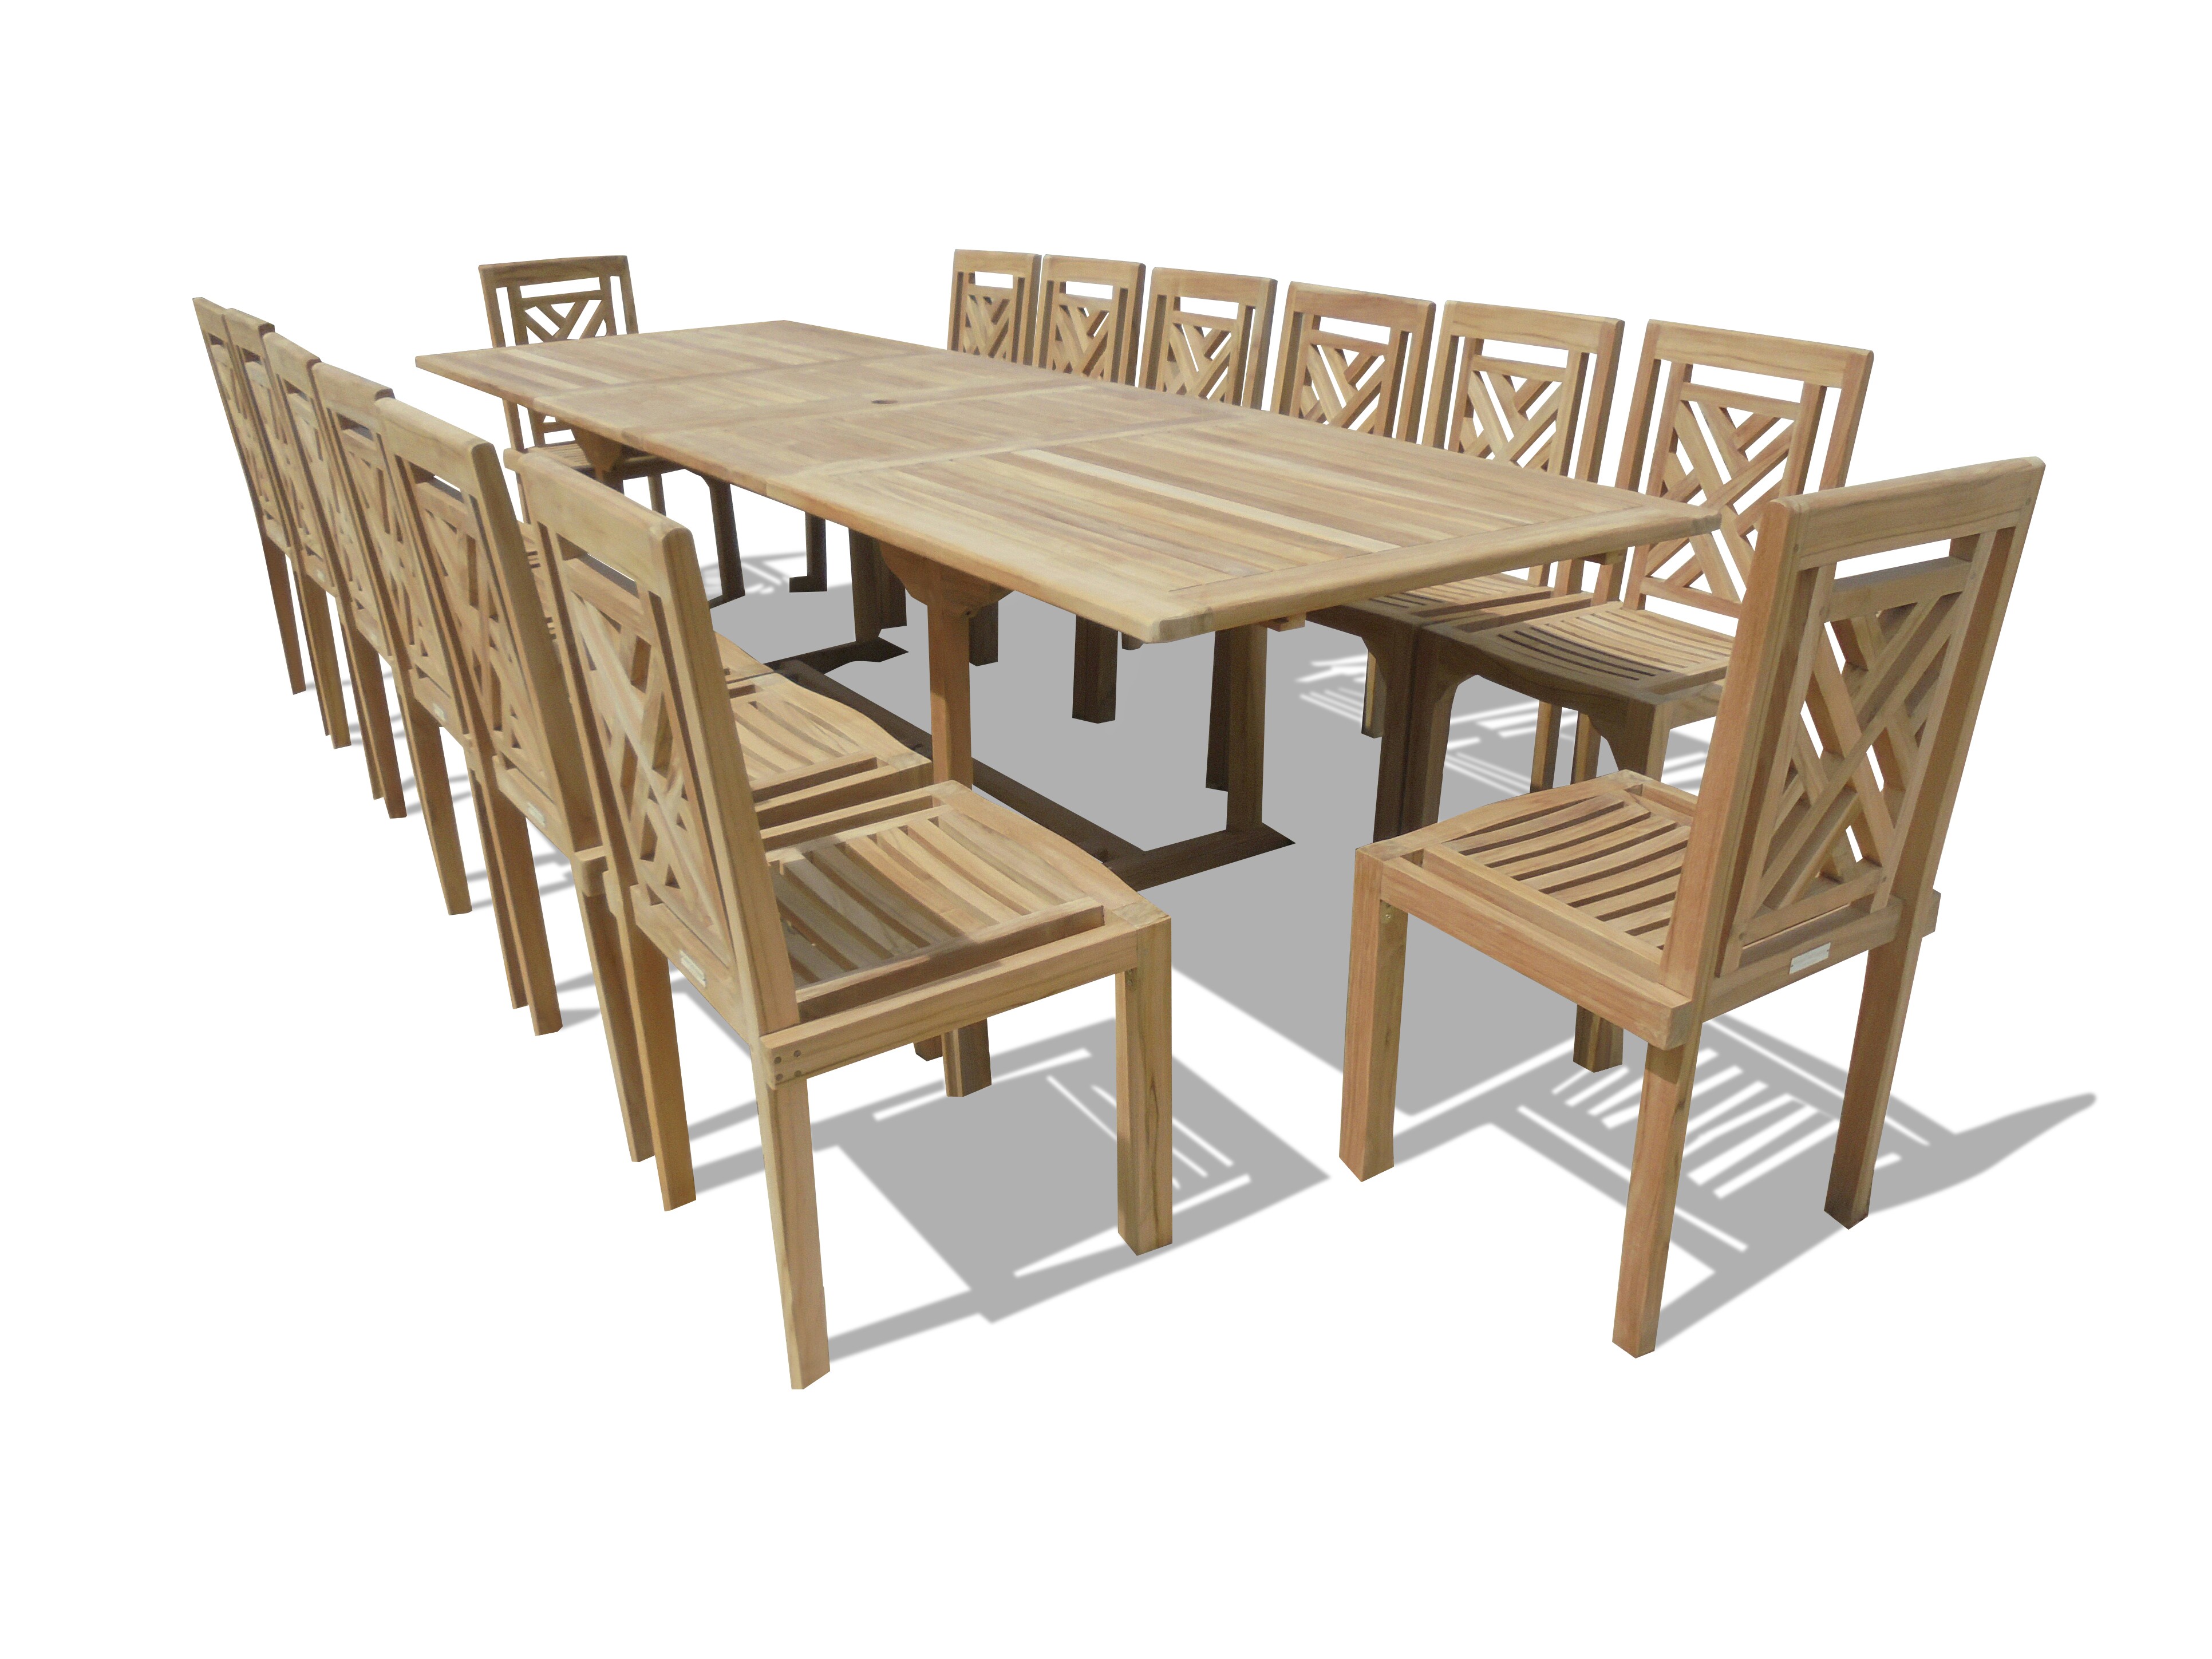 Buckingham 118" x 39" Double Leaf Extension Teak Table W/14 Chippendale Stacking Chairs...seats 14